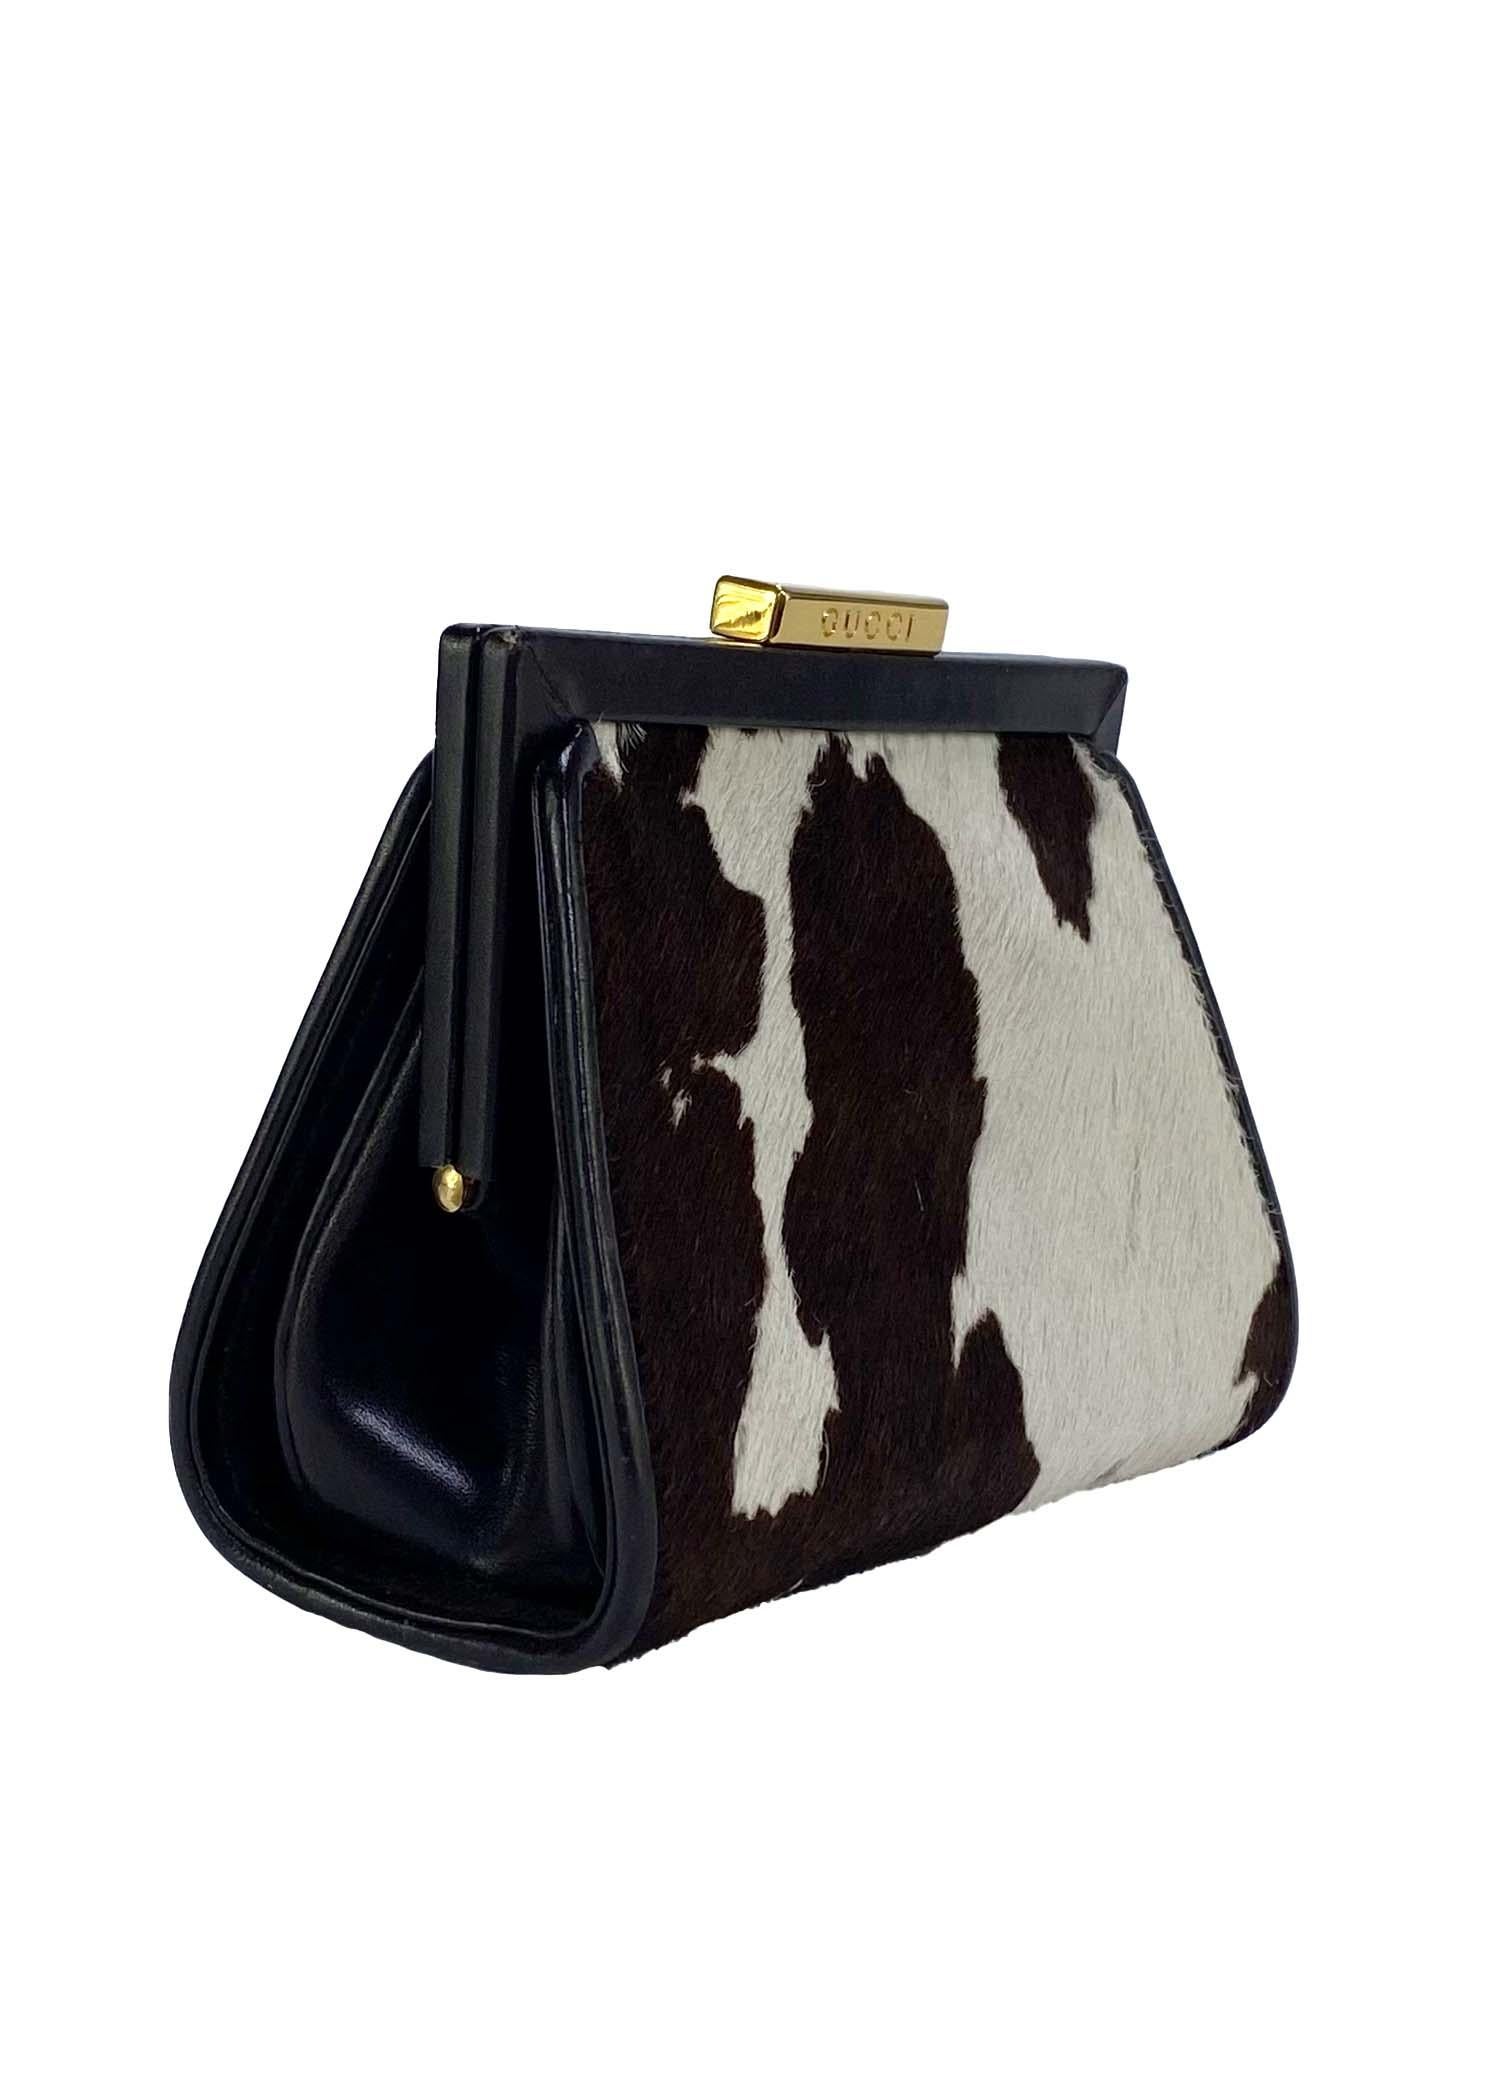 TheRealList presents: a beautiful and unusual pony hair cow print Gucci fanny pack, designed by Tom Ford. Likely from the 1995 collection, this versatile bag can be used as a clutch or waist bag when the matching belt is added. The bag is